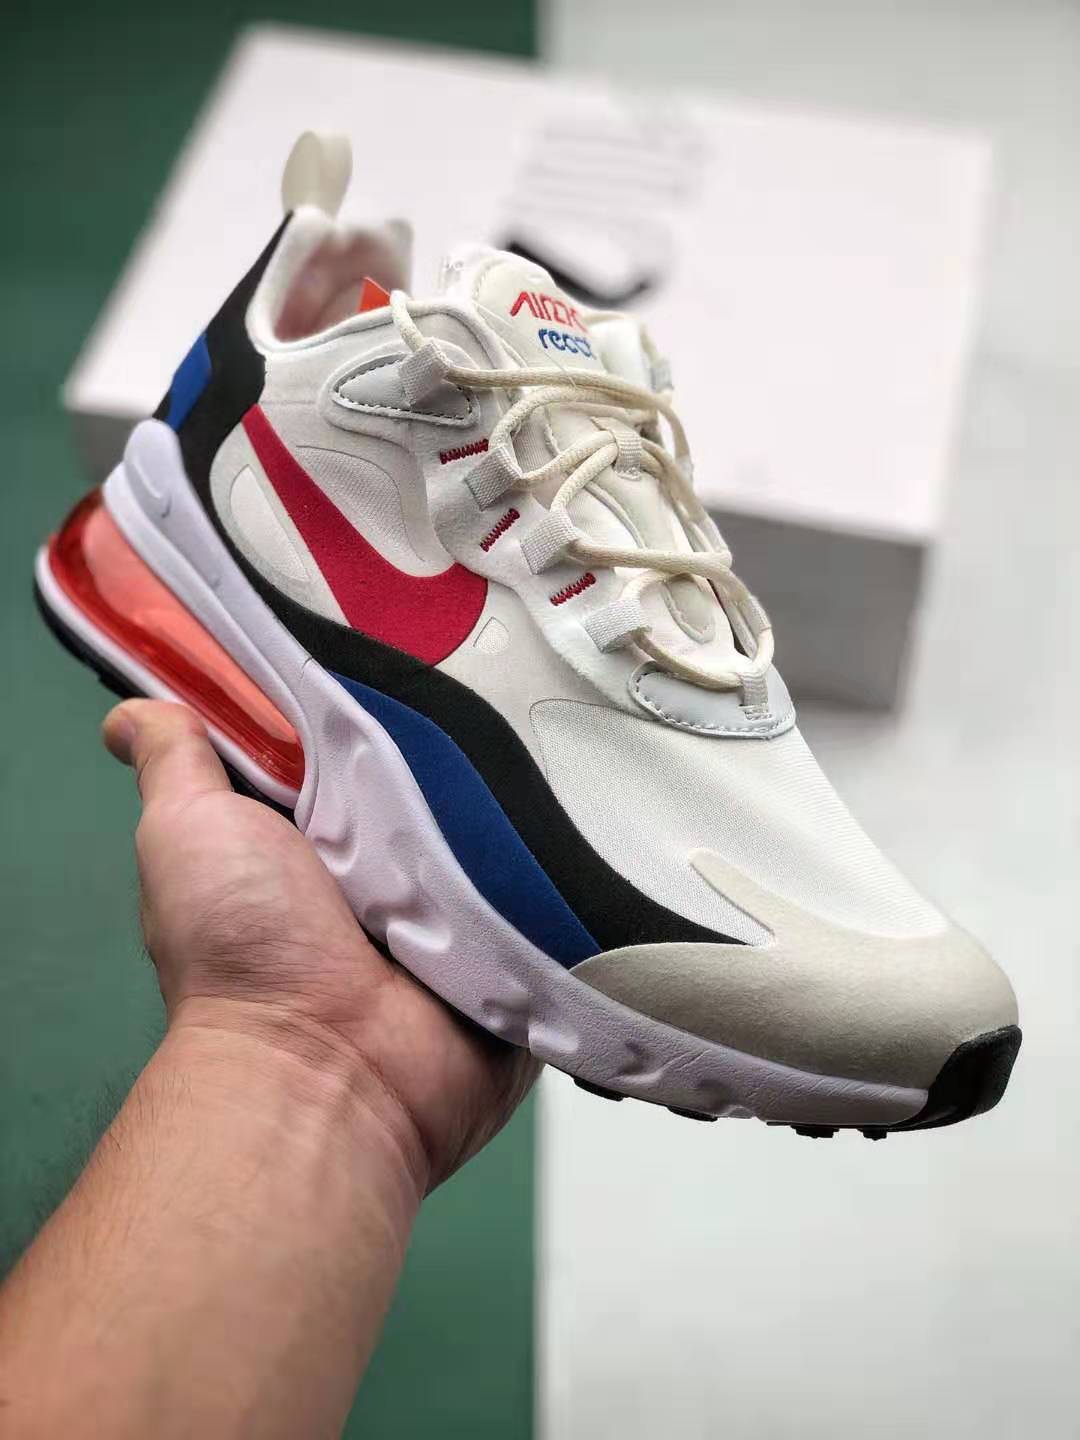 Nike Air Max 270 React White Black Blue Red Casual Running Shoes